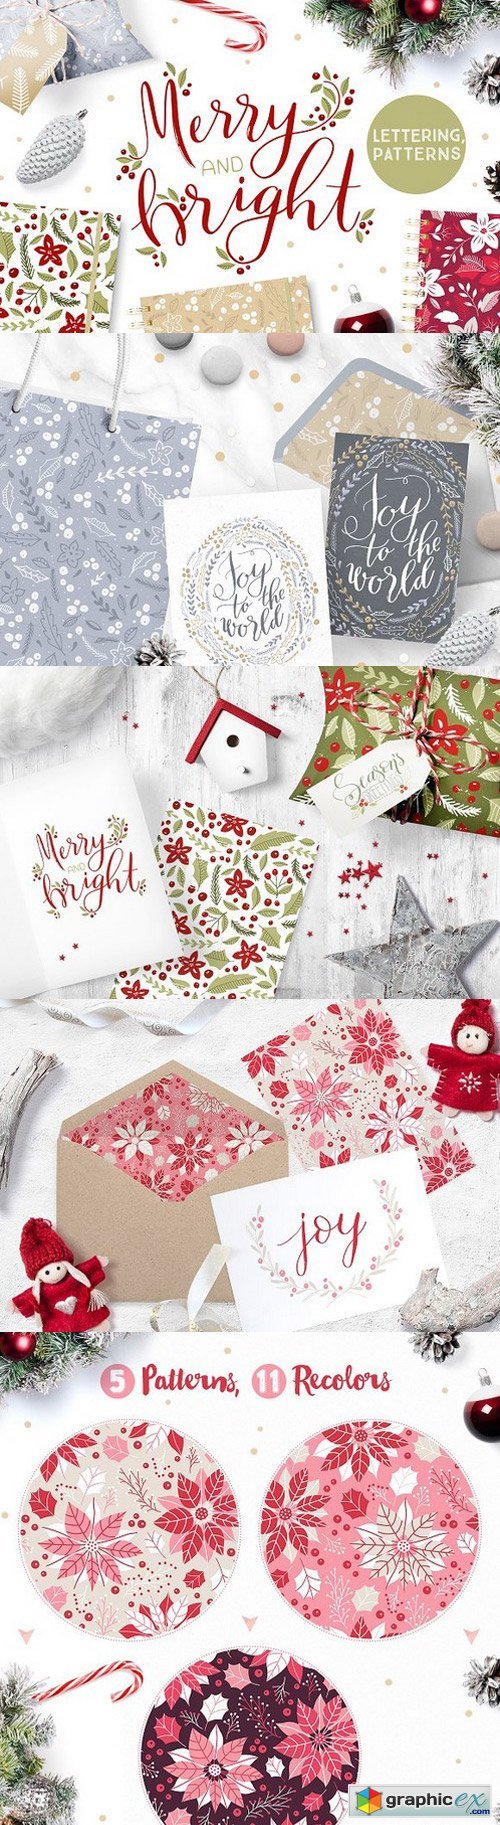 Christmas hand lettering & patterns